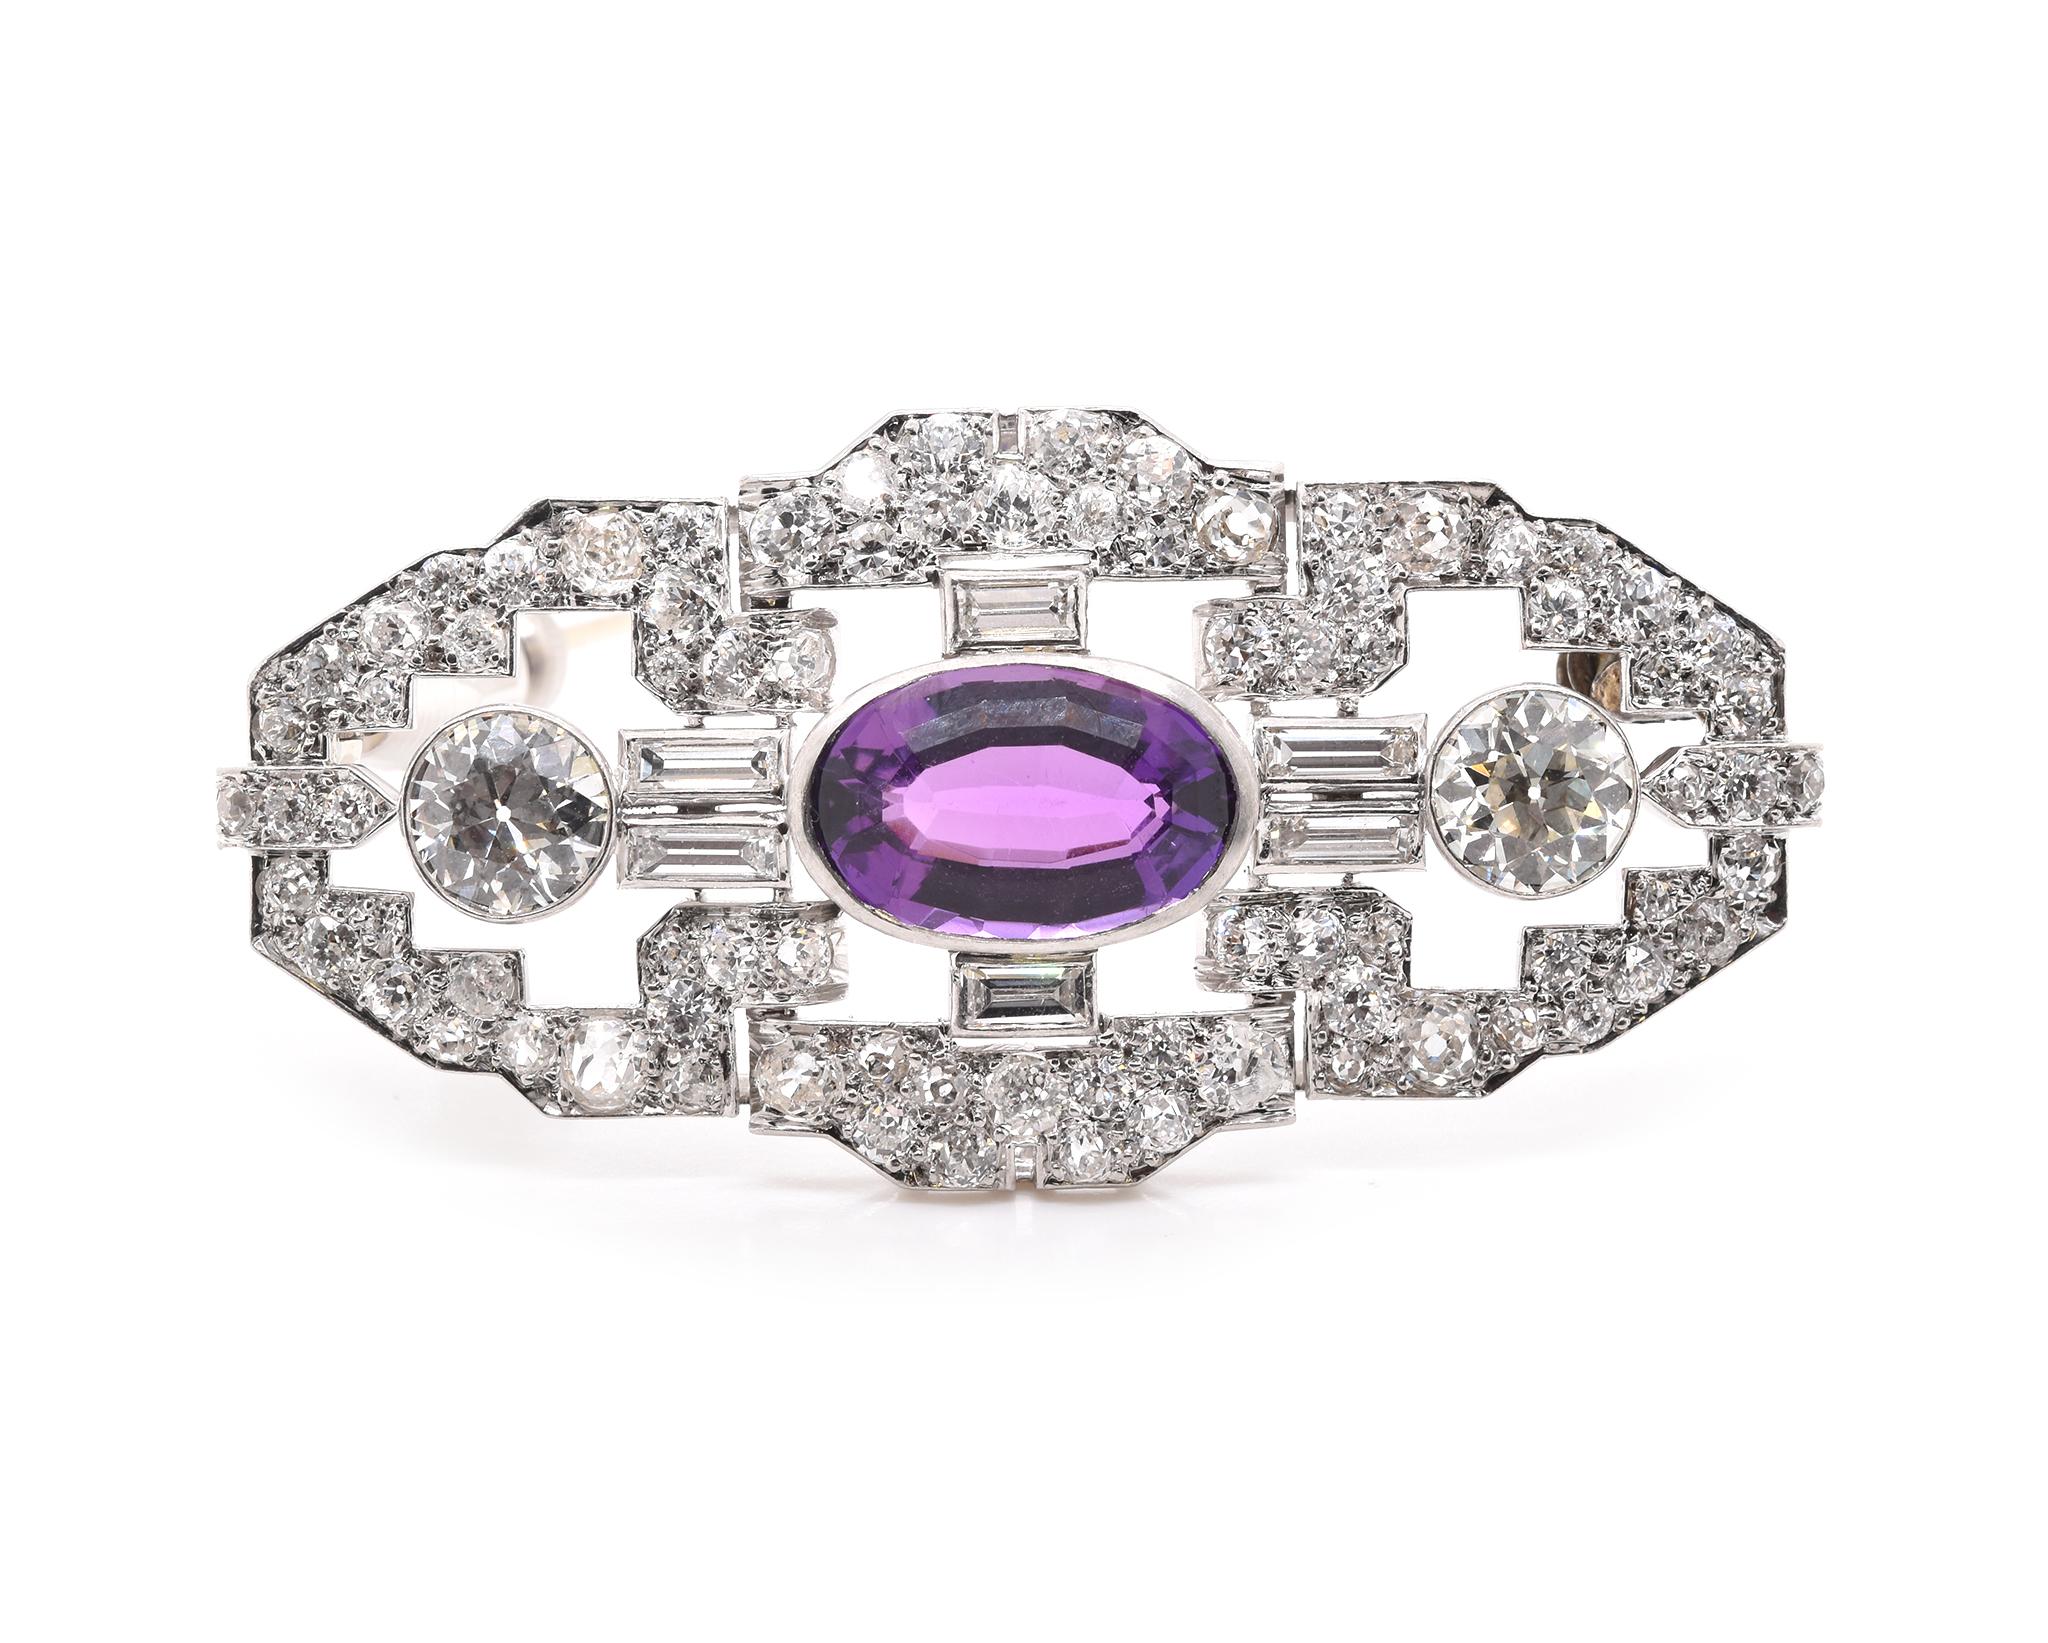 Platinum Vintage Art Deco Amethyst and Diamond Pin In Good Condition For Sale In Scottsdale, AZ